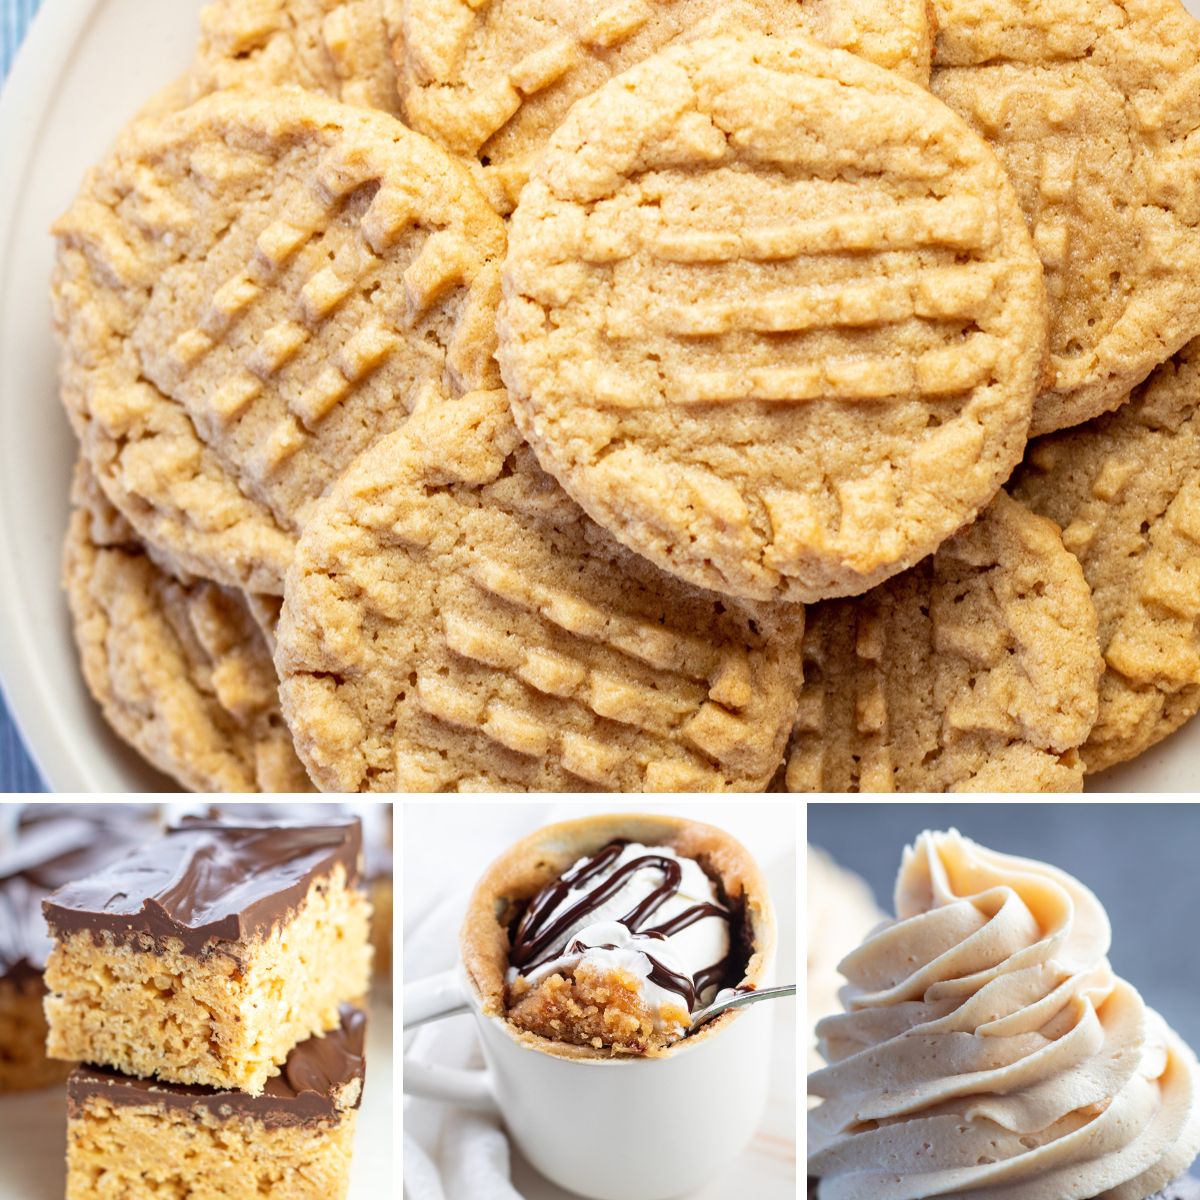 Best peanut butter recipes collage with 4 recipes using peanut butter featured.